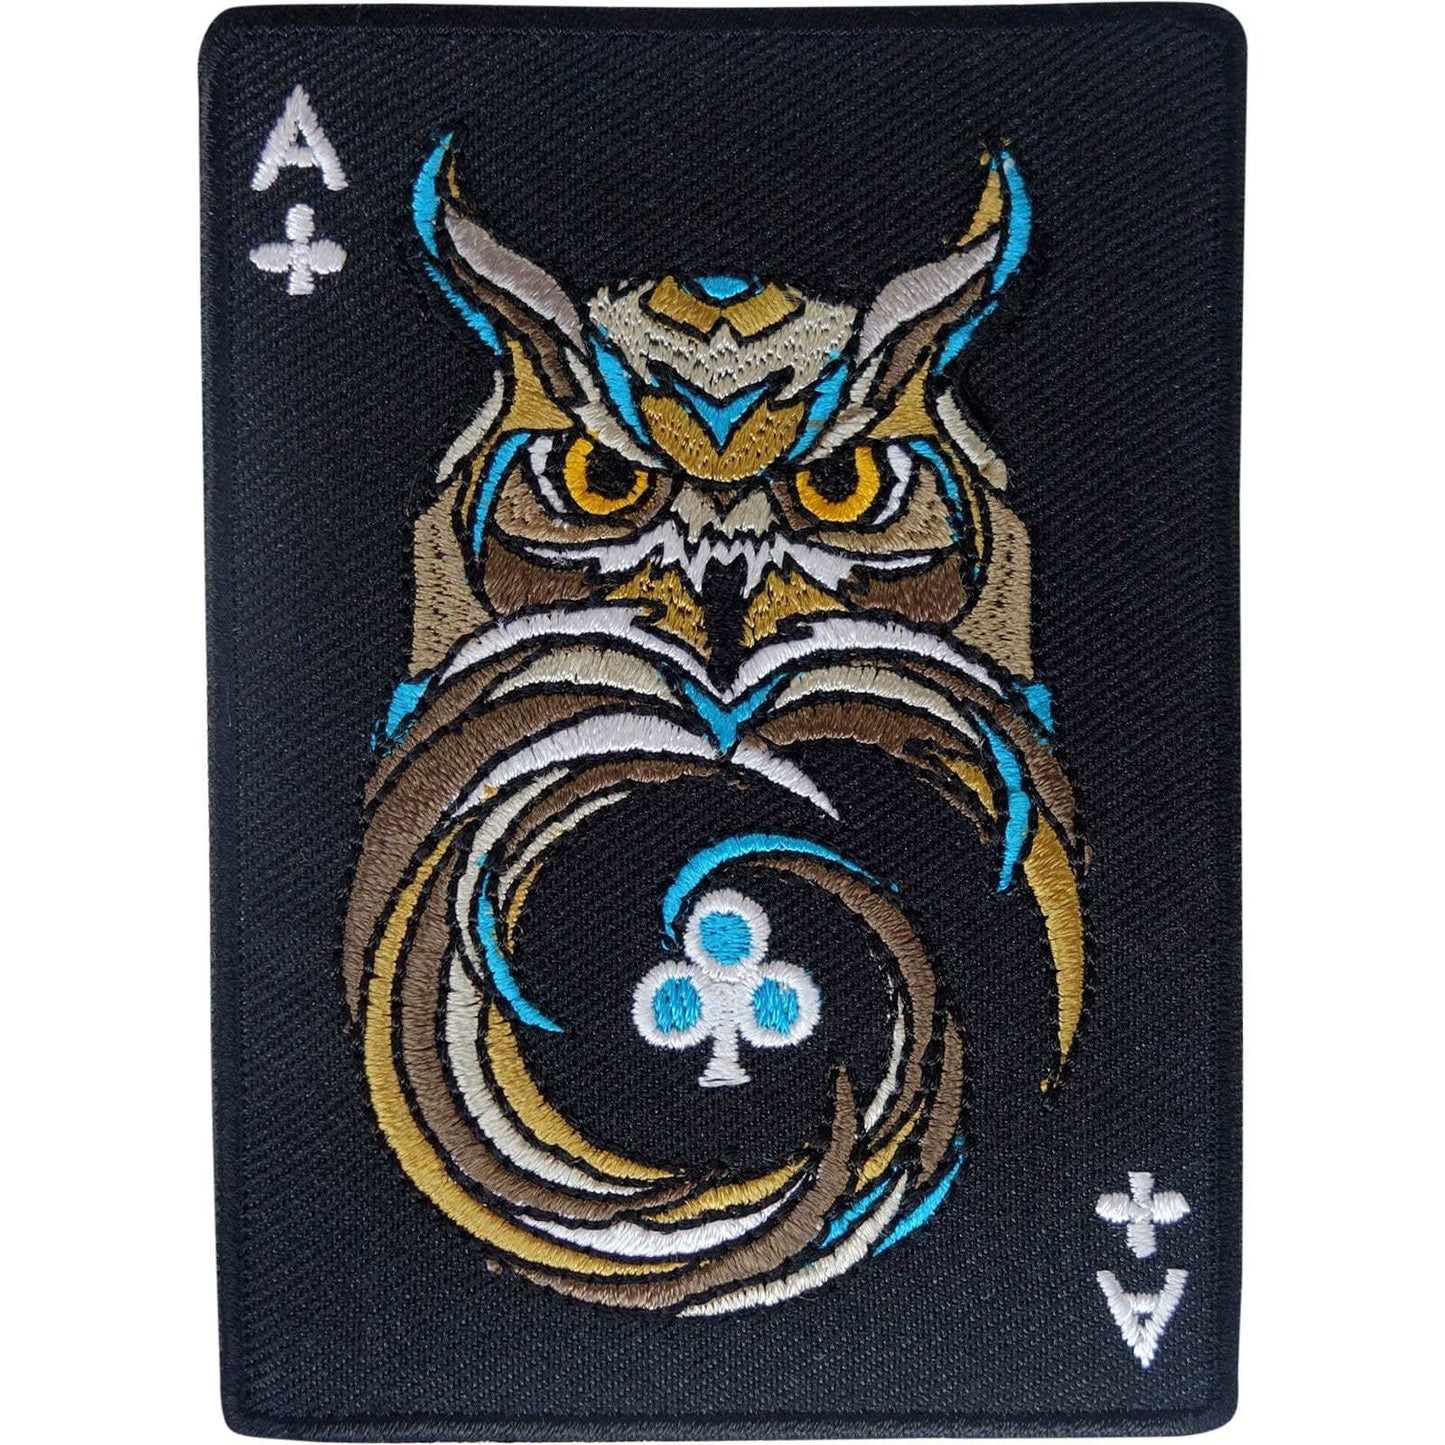 Ace of Clubs Owl Patch Iron Sew On Clothes Black Playing Card Embroidered Badge